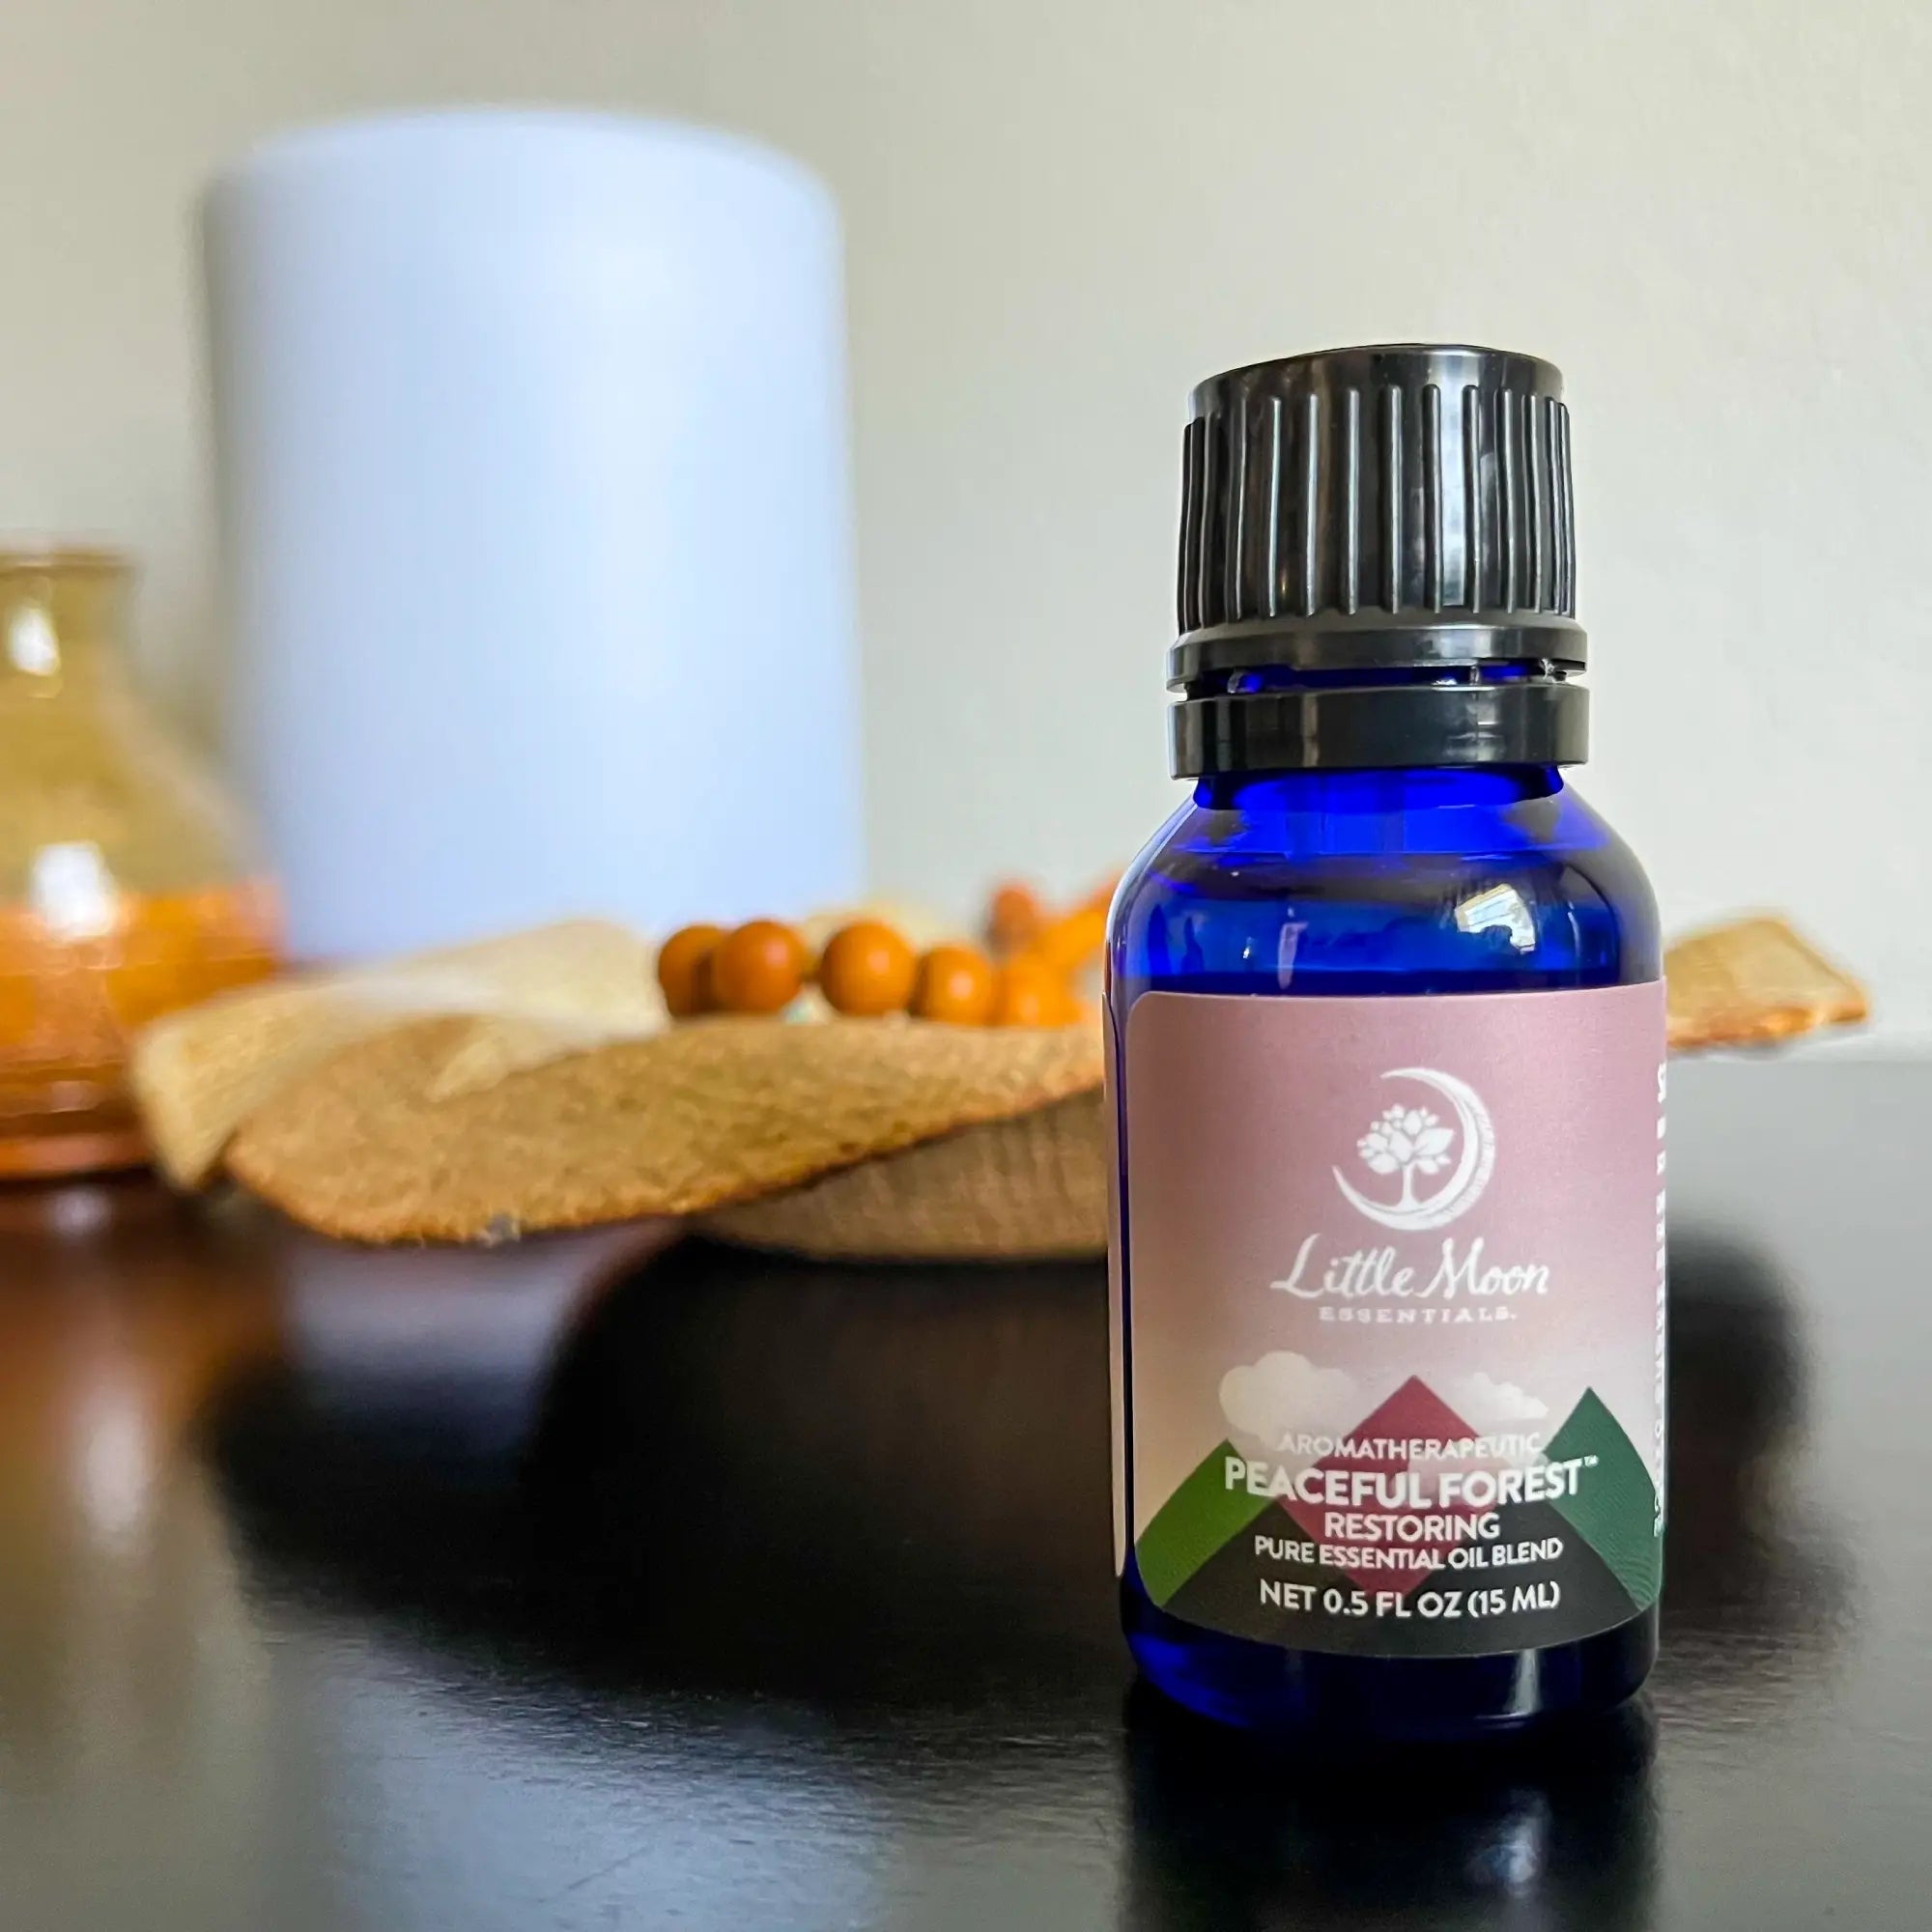 Peaceful Forest™ Essential Oil Blend - Little Moon Essentials